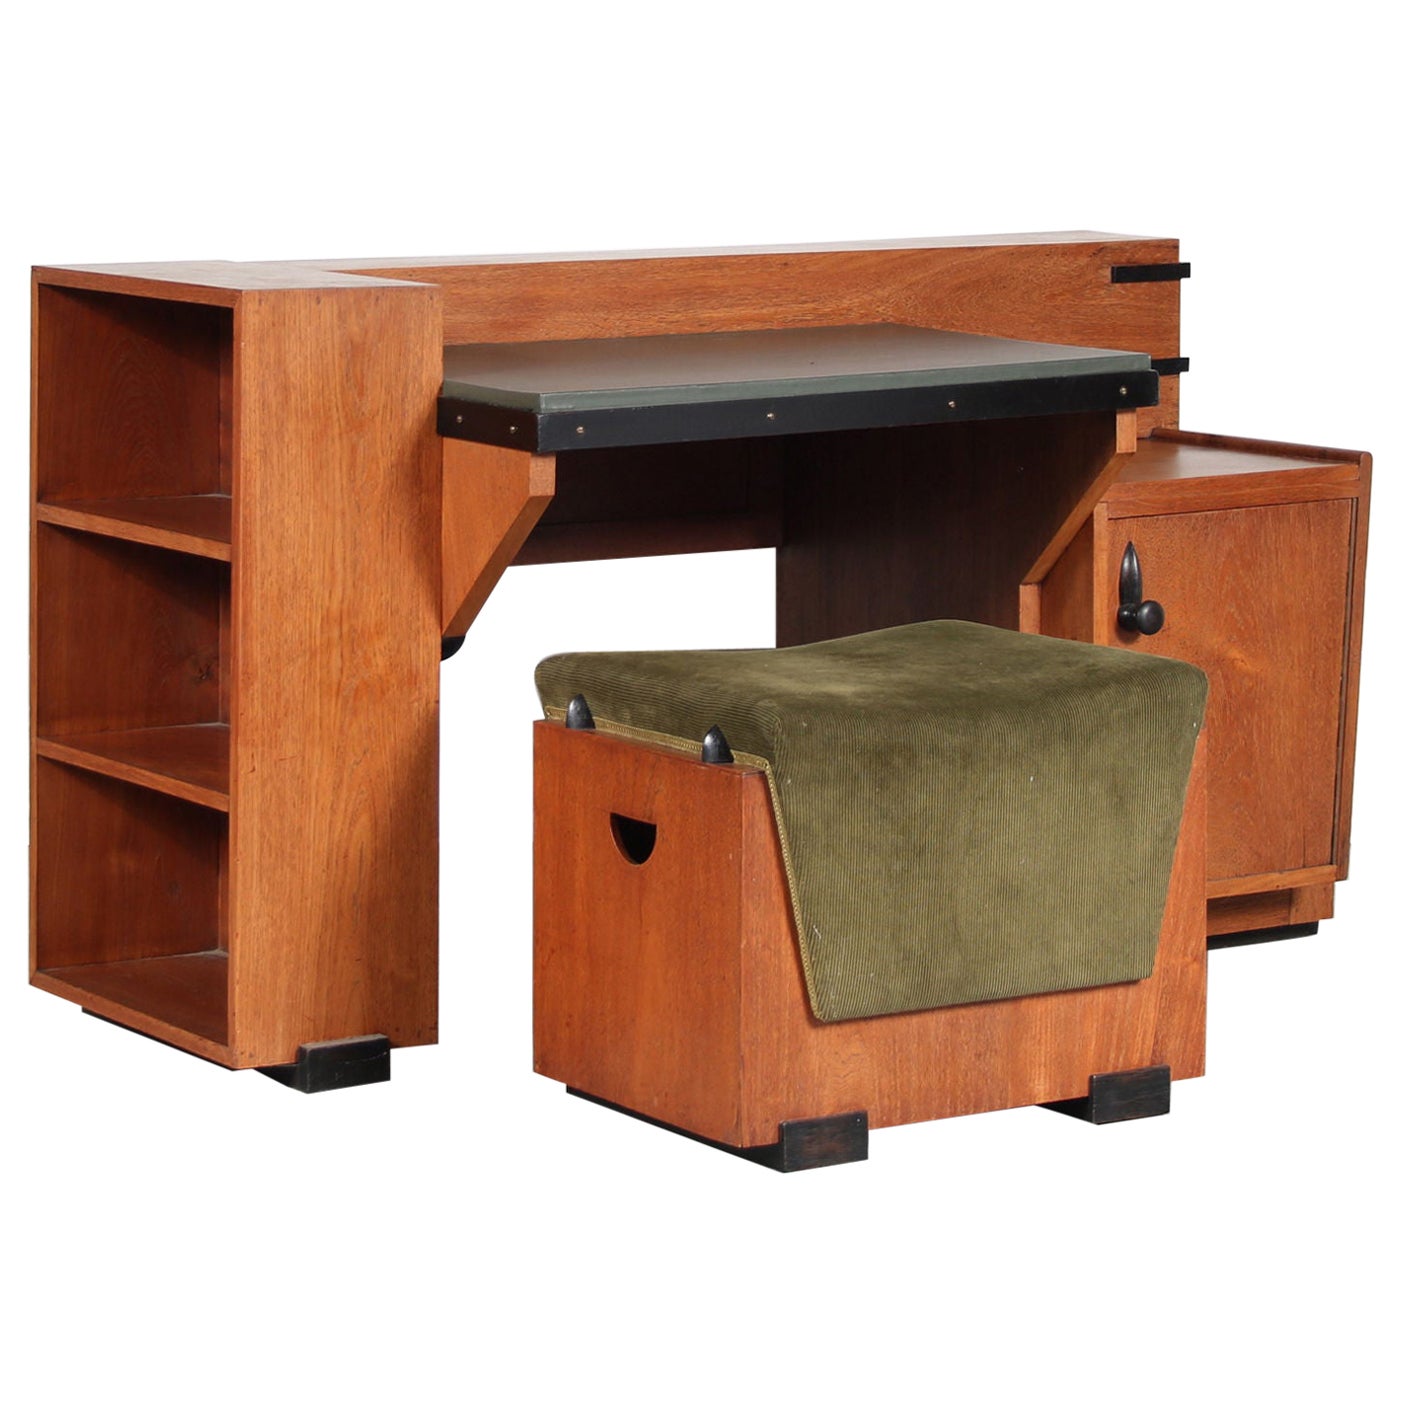 Colonial Haagse School Desk with Stool, Indonesia, 1930 For Sale